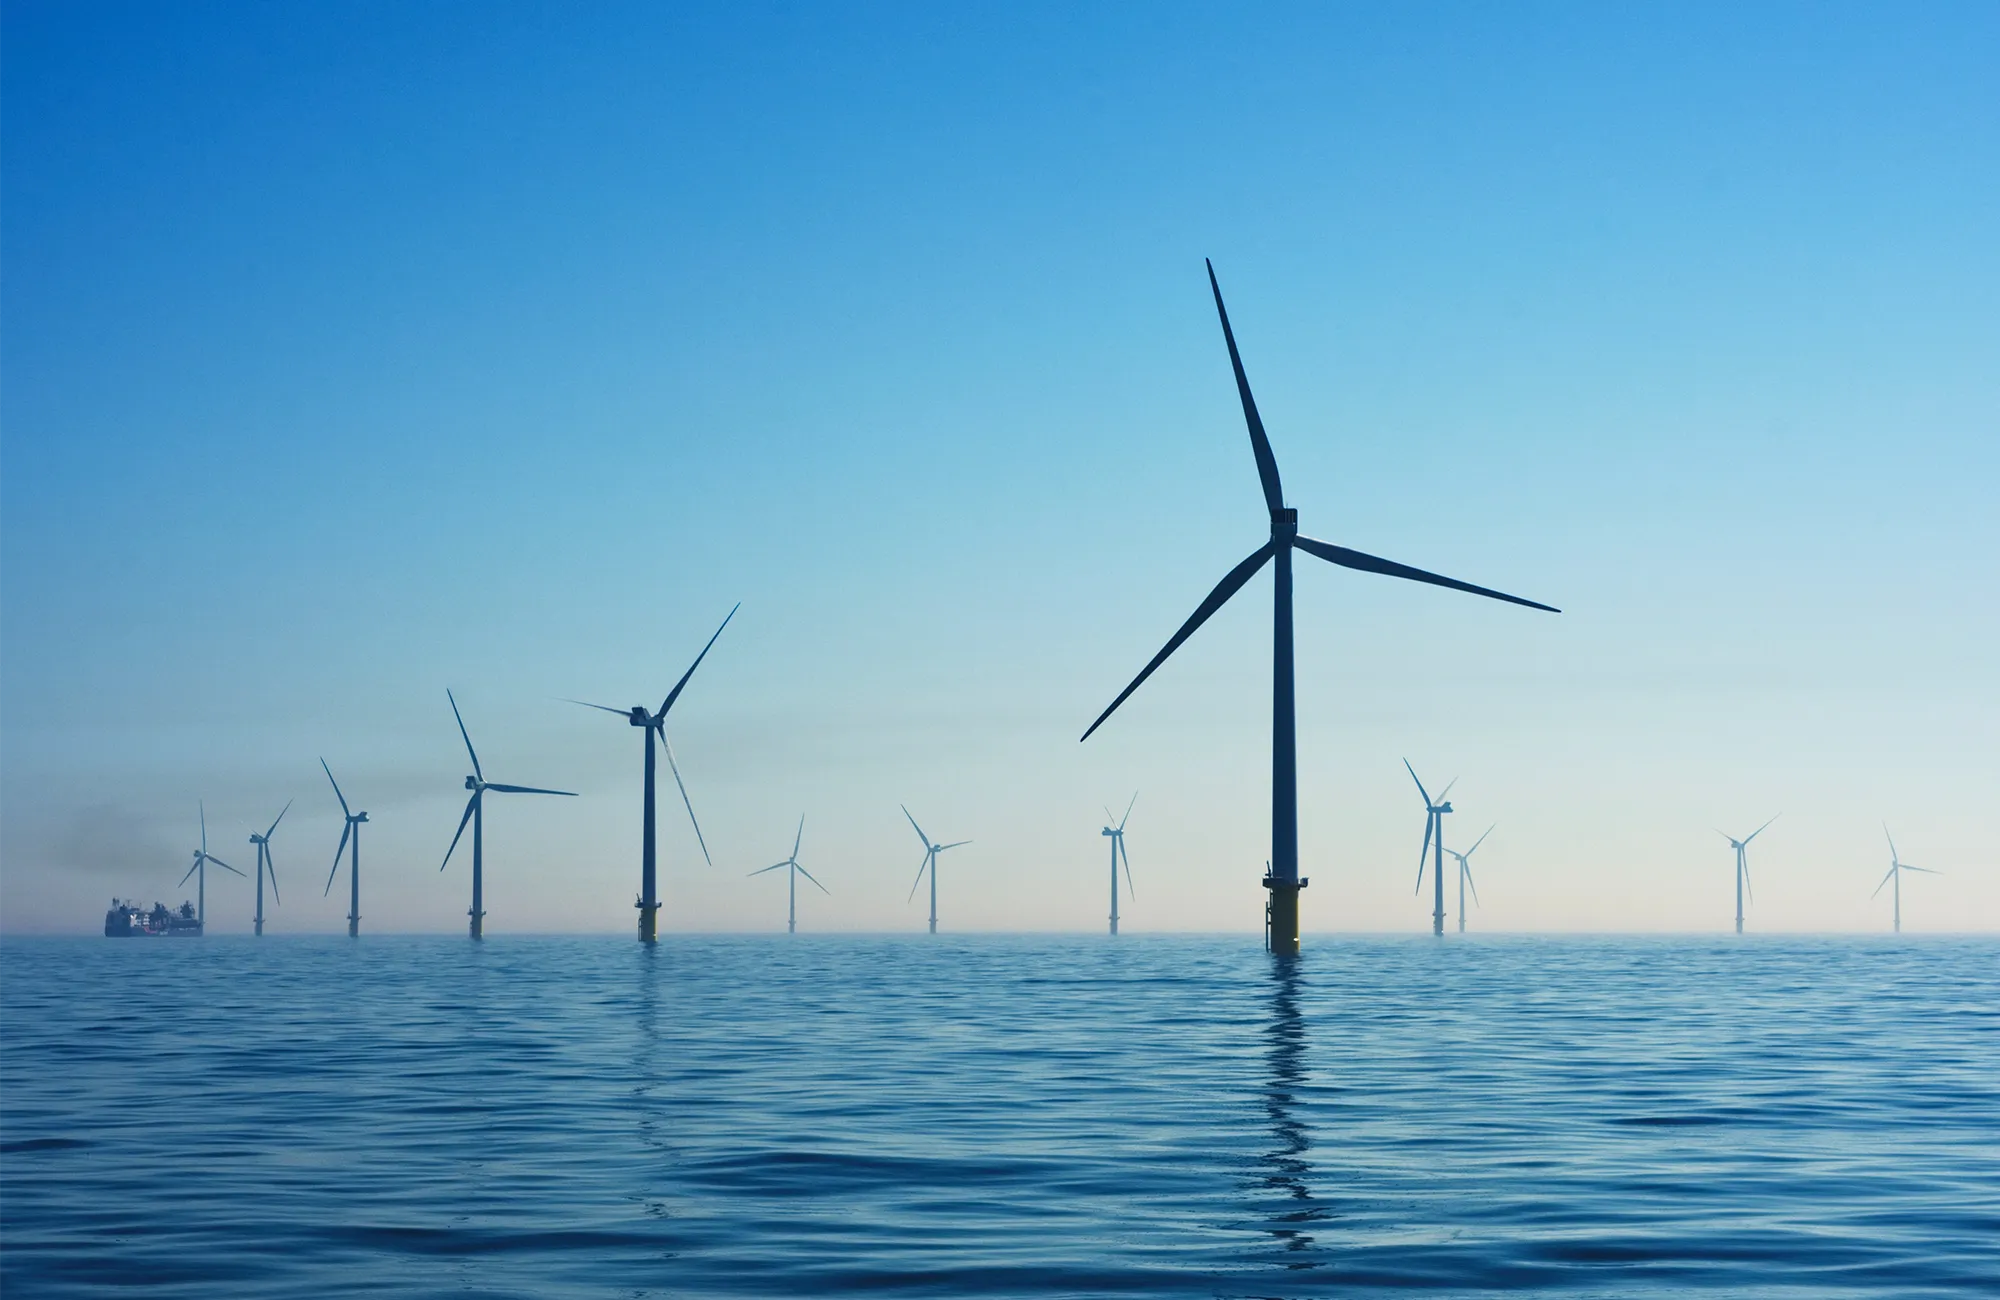 Wind power: what are the challenges and how can graphene meet them?